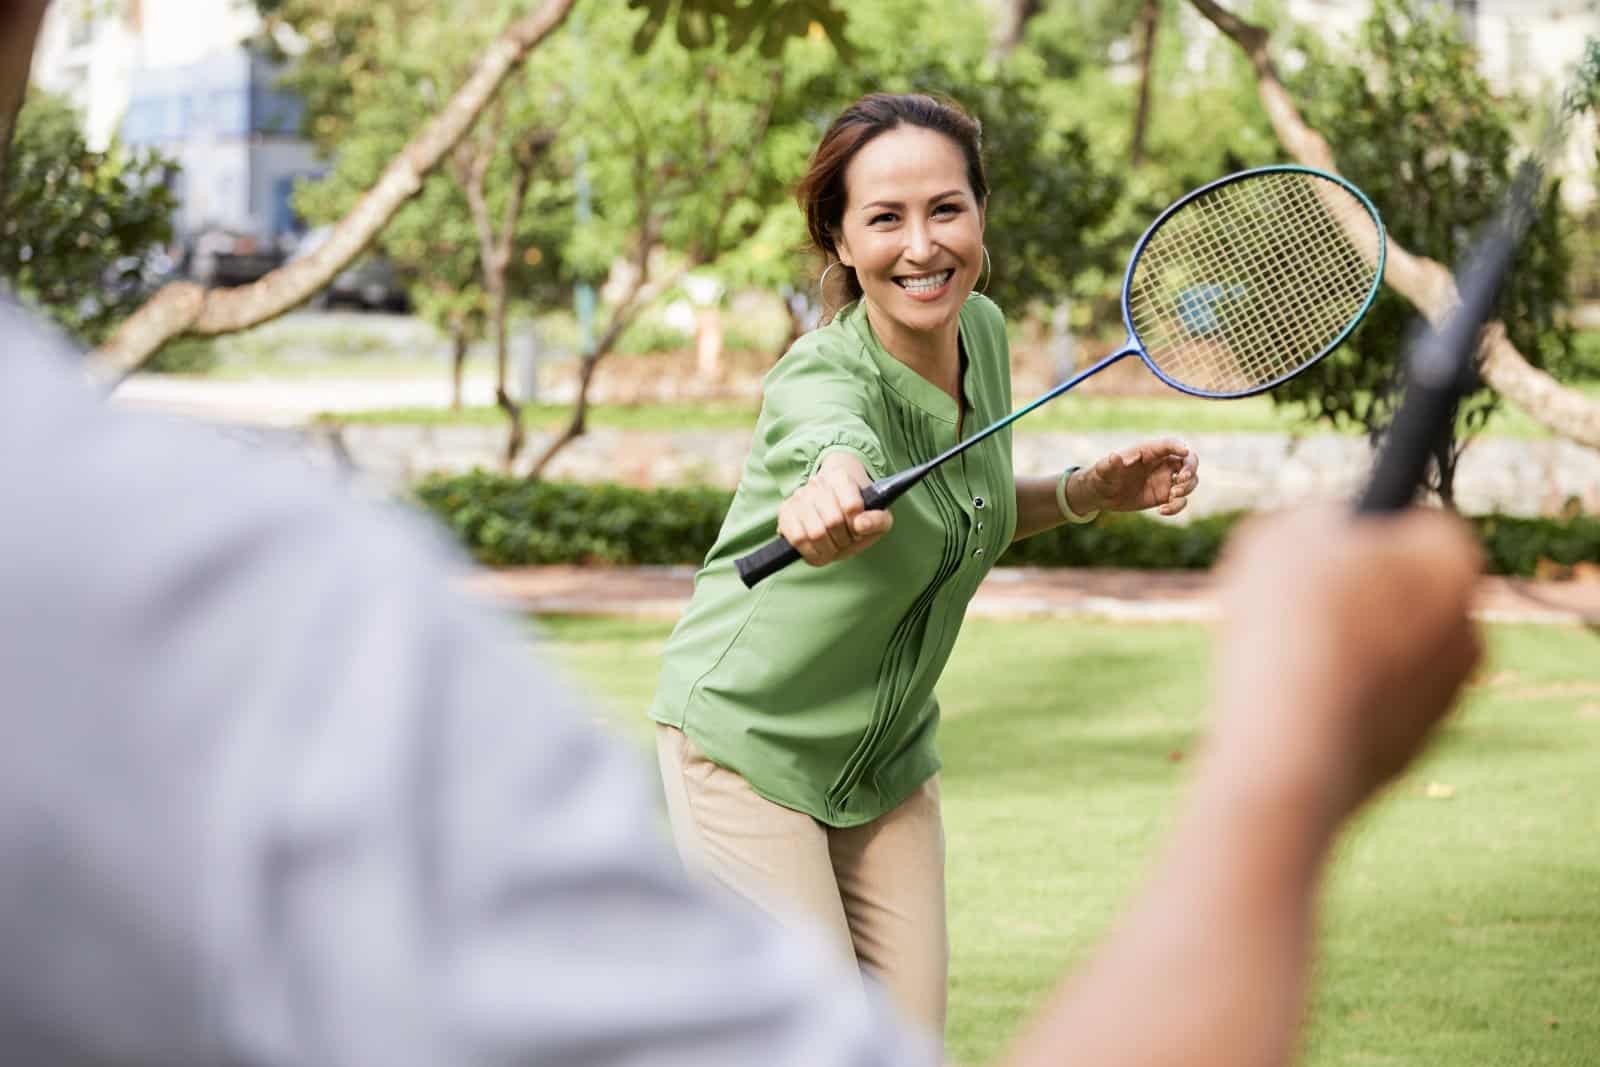 Image credit: Shutterstock / Dragon Images <p>Engage in a family sport or play active games like soccer, frisbee, or even a simple game of tag in the backyard. These physical activities boost health, release endorphins, and offer a fun way to spend time together away from digital temptations.</p>